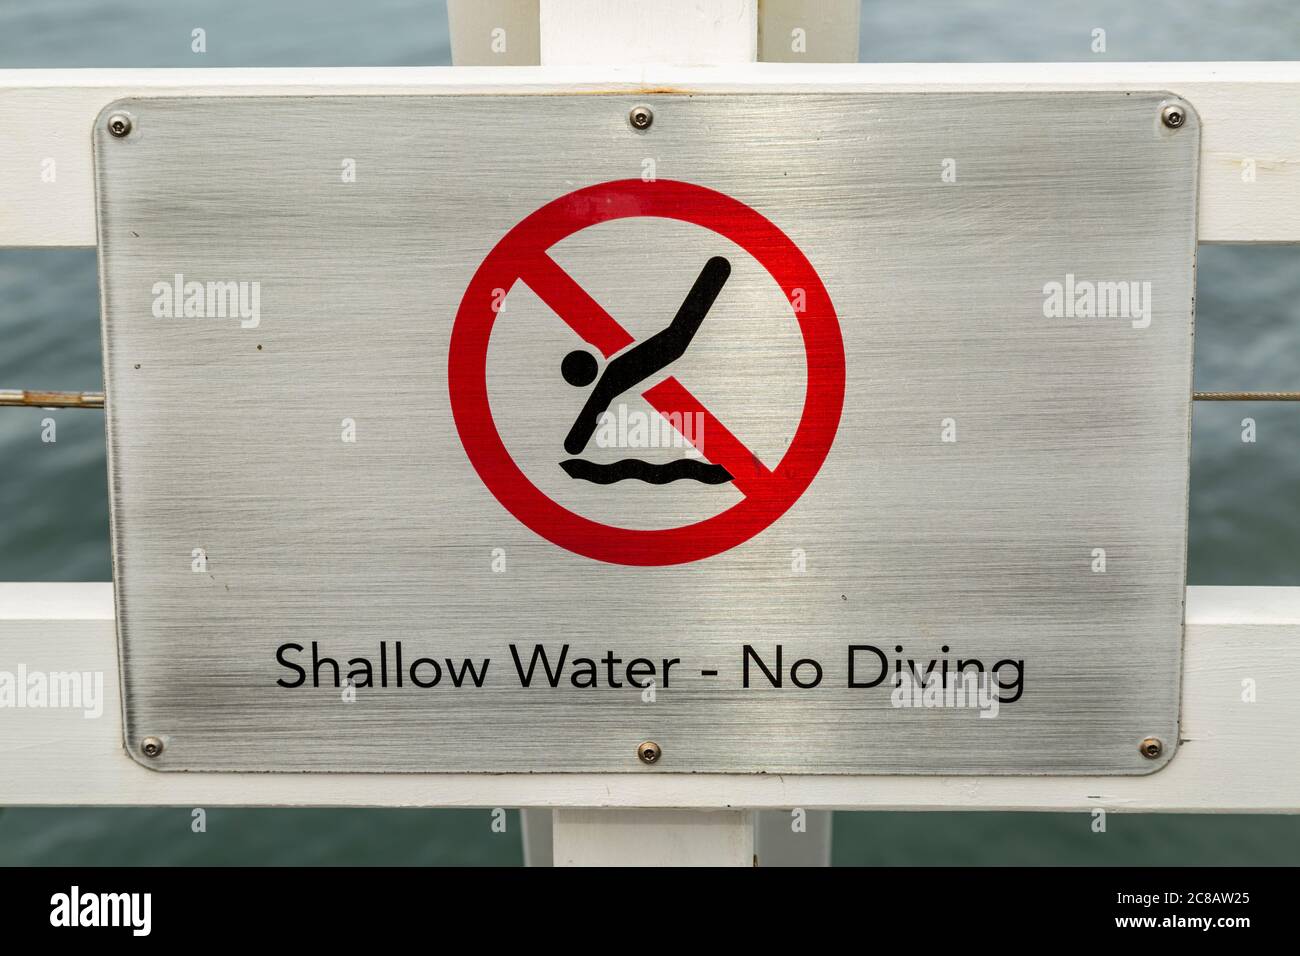 Shallow water - no diving sign Stock Photo